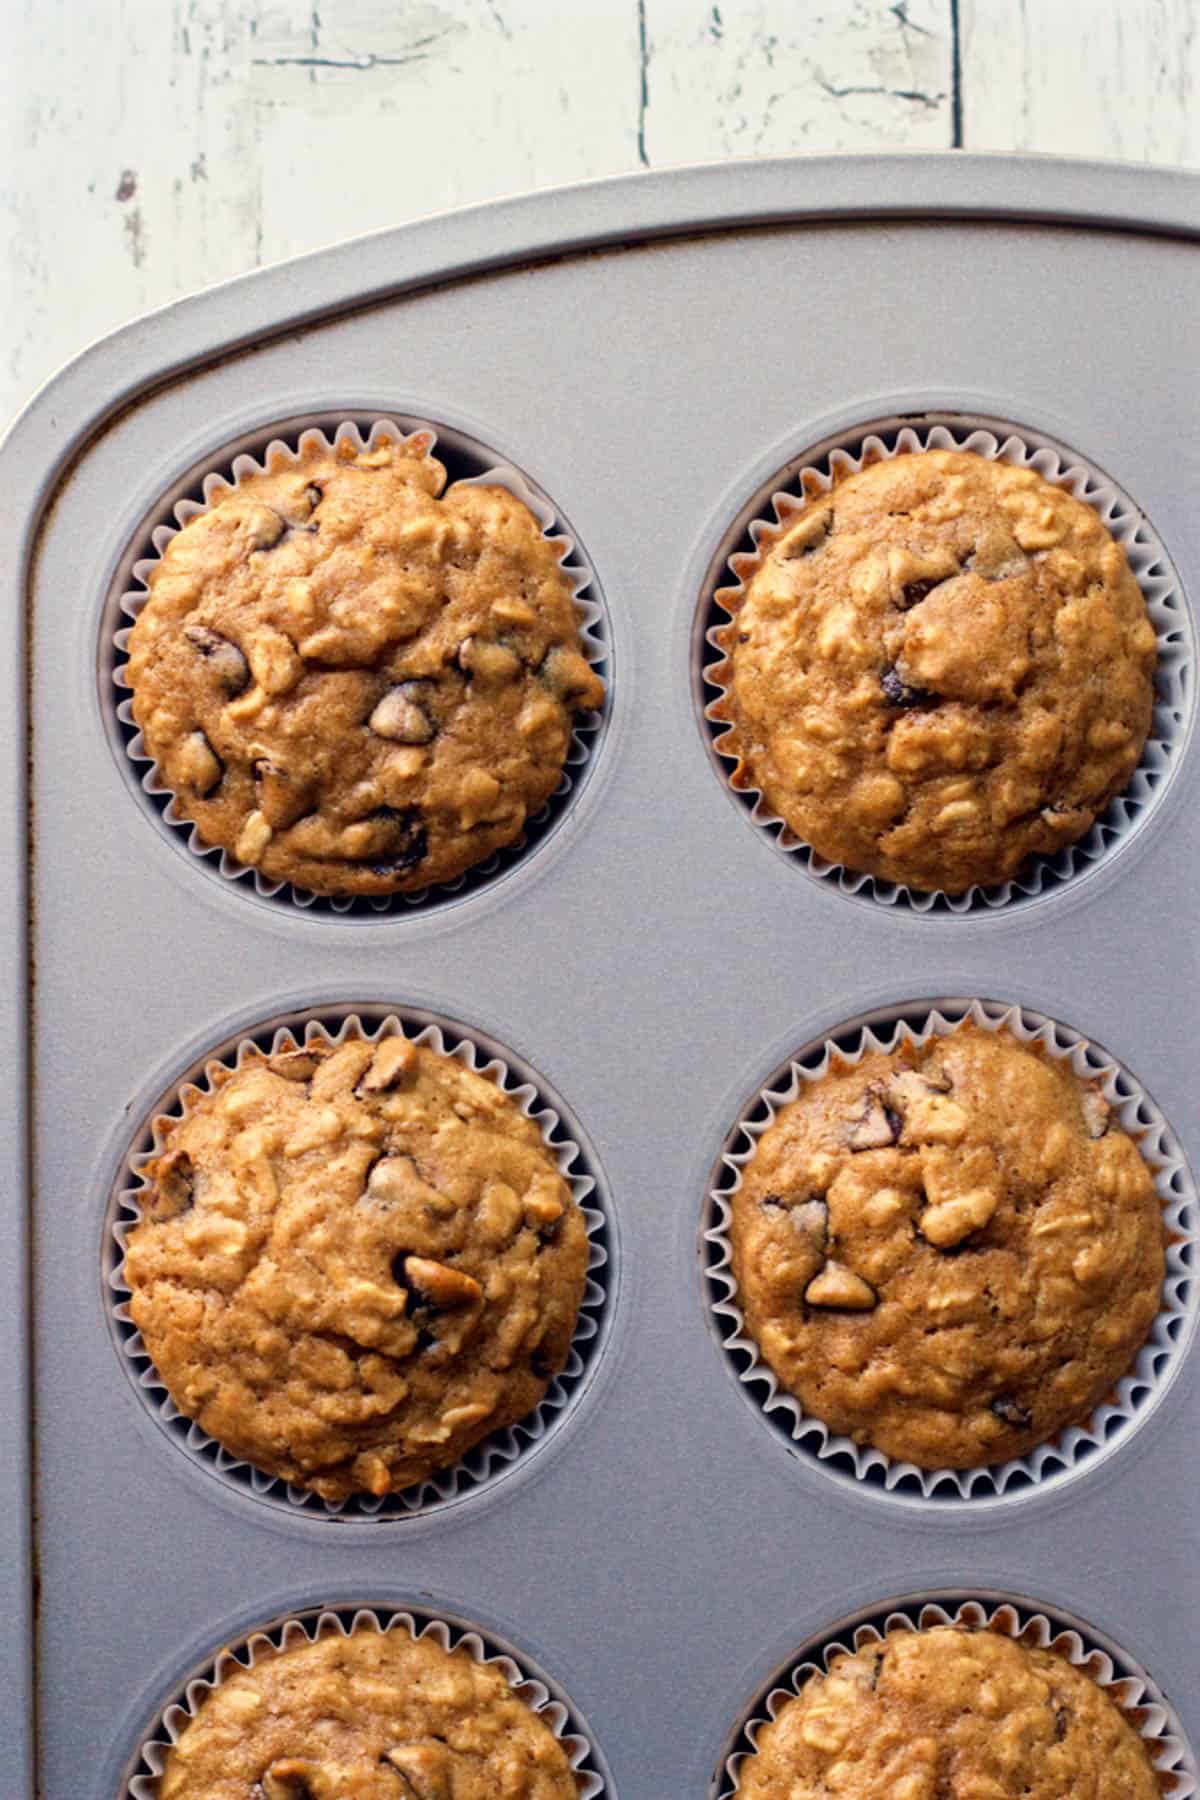 Oatmeal chocolate chip muffins in a muffin tin after baking.